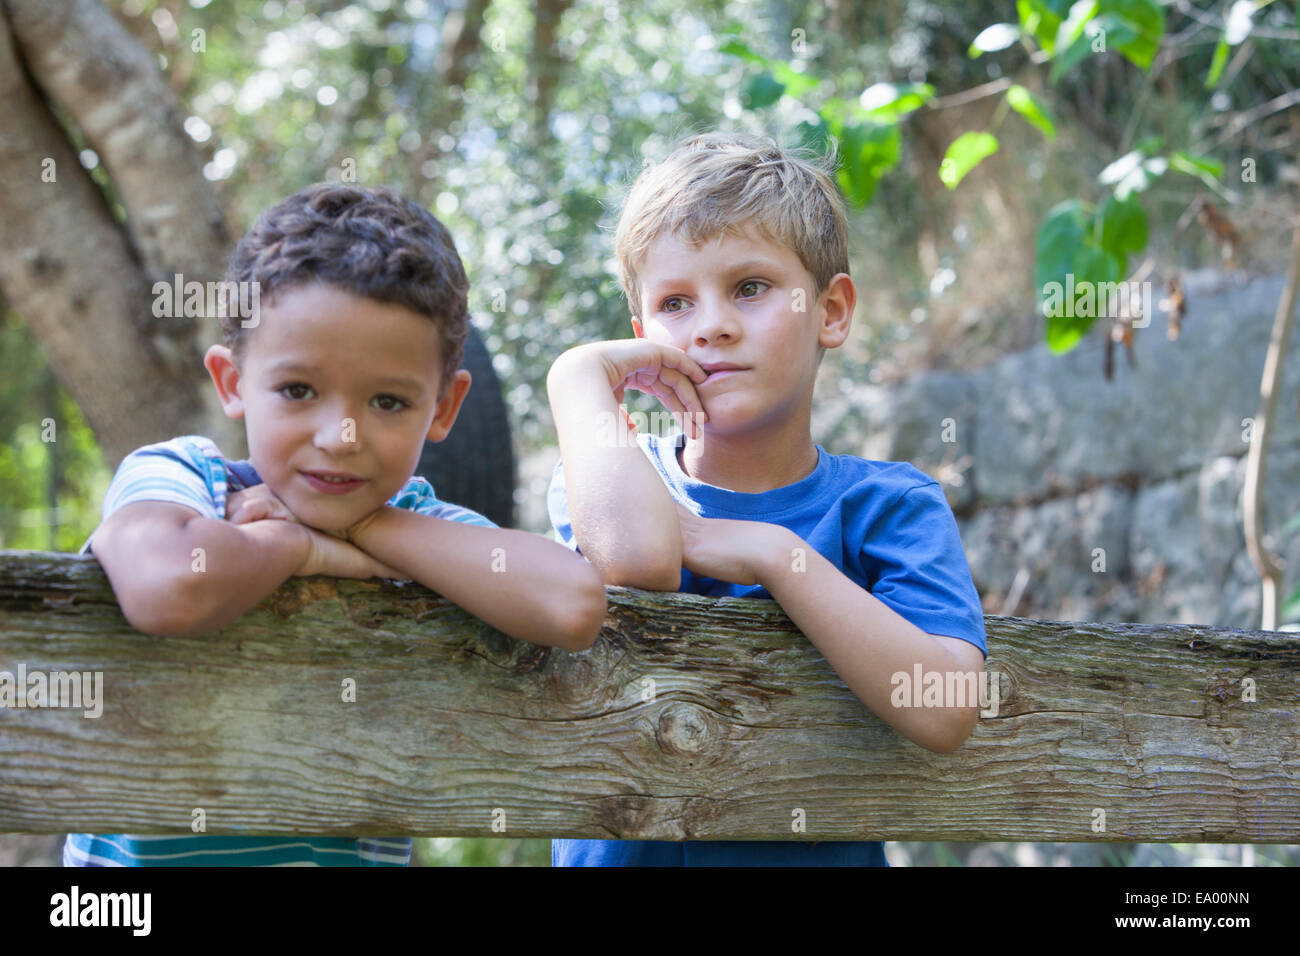 Portrait of two boys leaning on garden fence Stock Photo